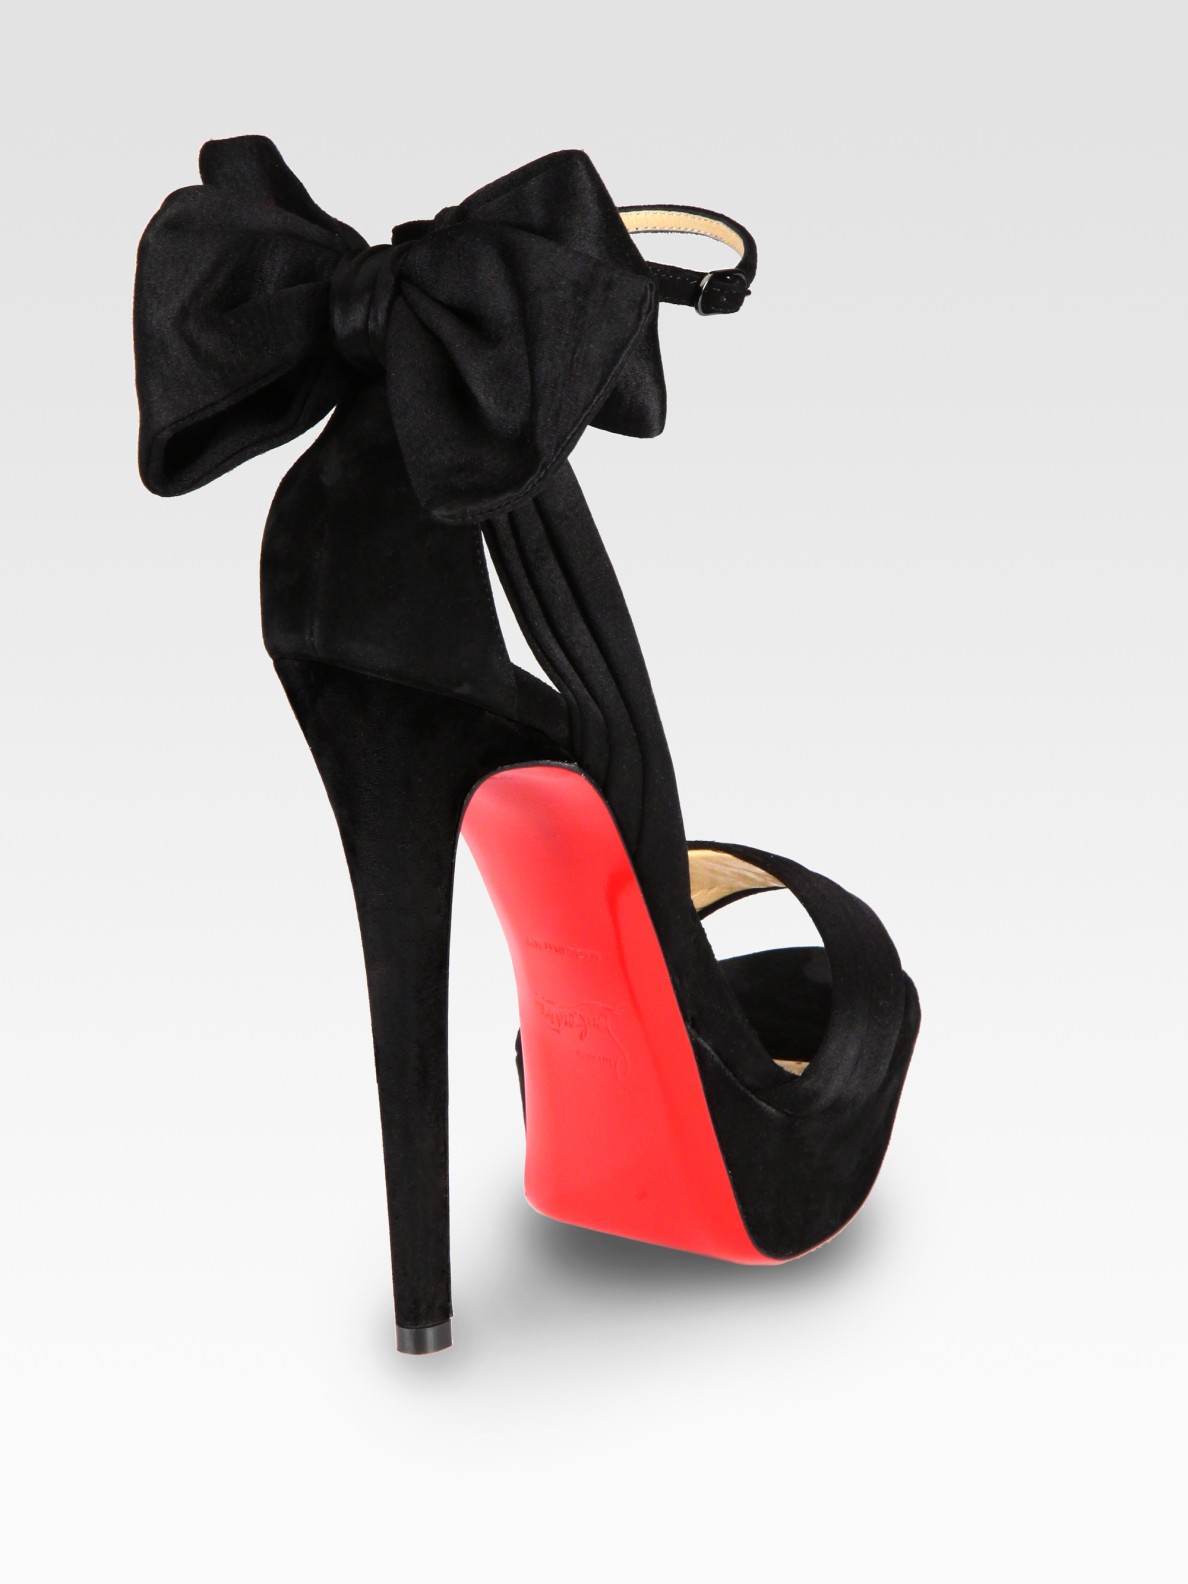 louis vuitton red bottom pumps - Christian louboutin Satin and Suede Bow Platform Sandals in Black ...